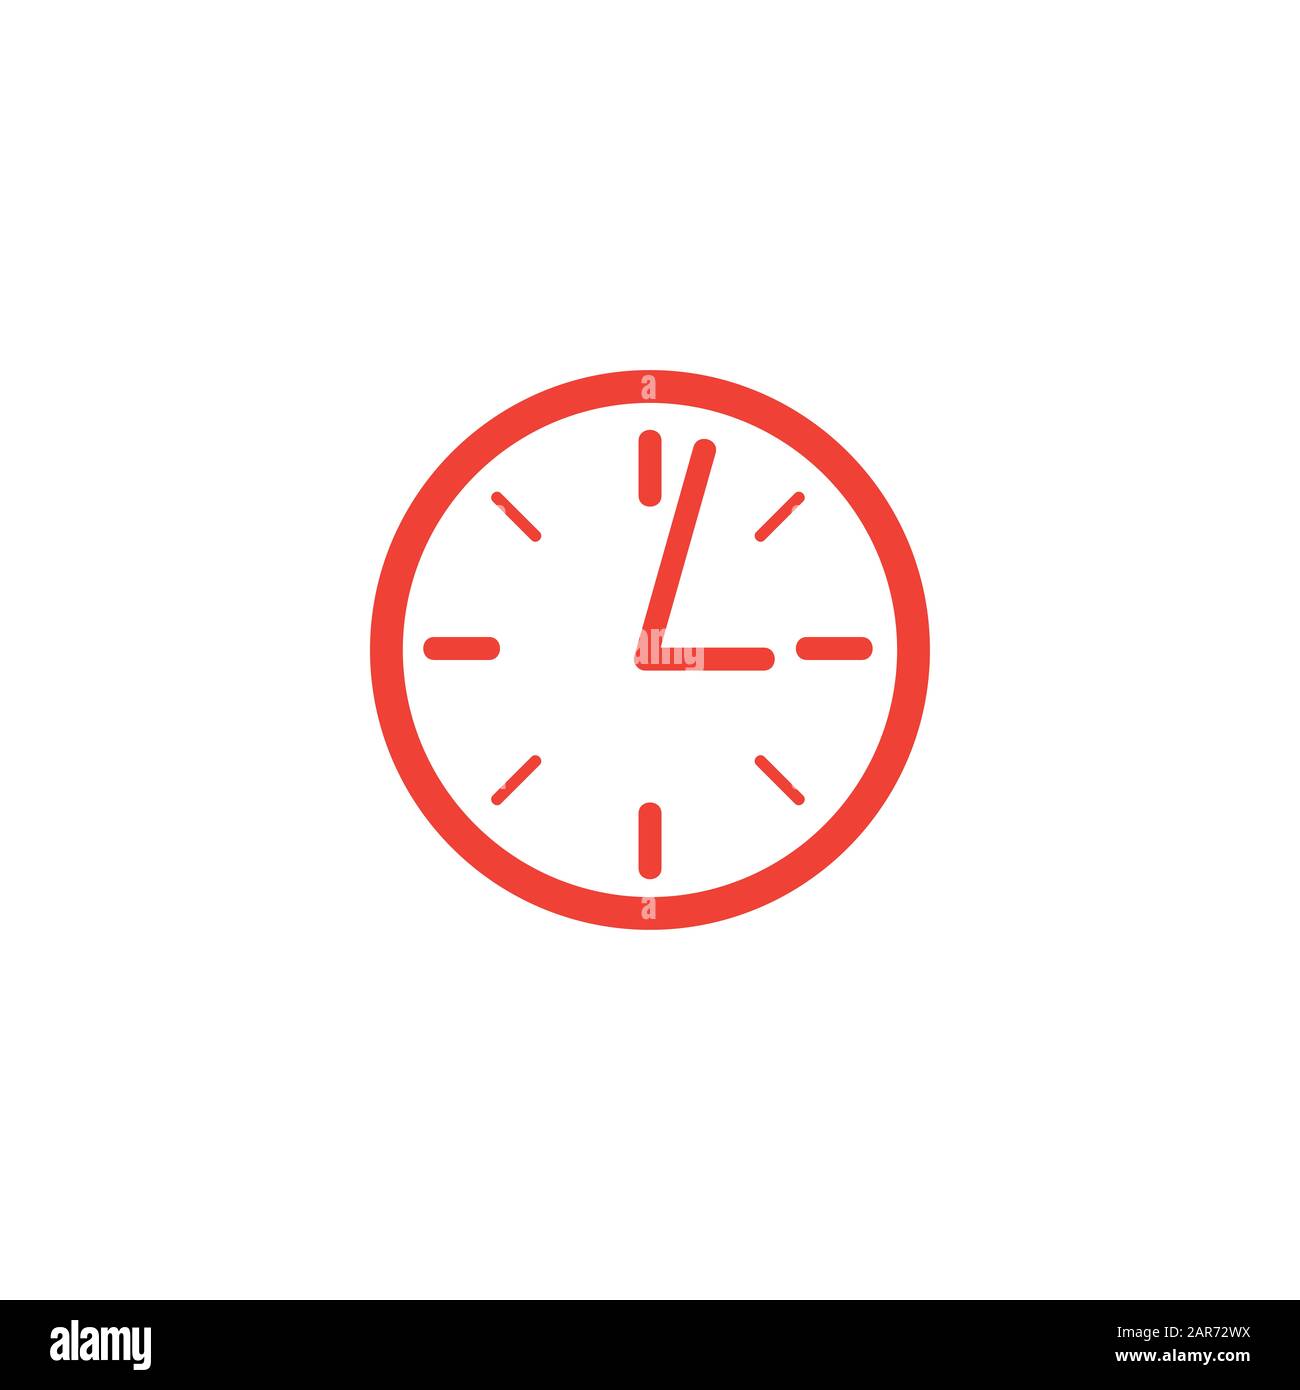 Clock Red Icon On White Background Red Flat Style Vector Illustration Stock Photo Alamy Clock icon aesthetic (page 1). https www alamy com clock red icon on white background red flat style vector illustration image341290038 html